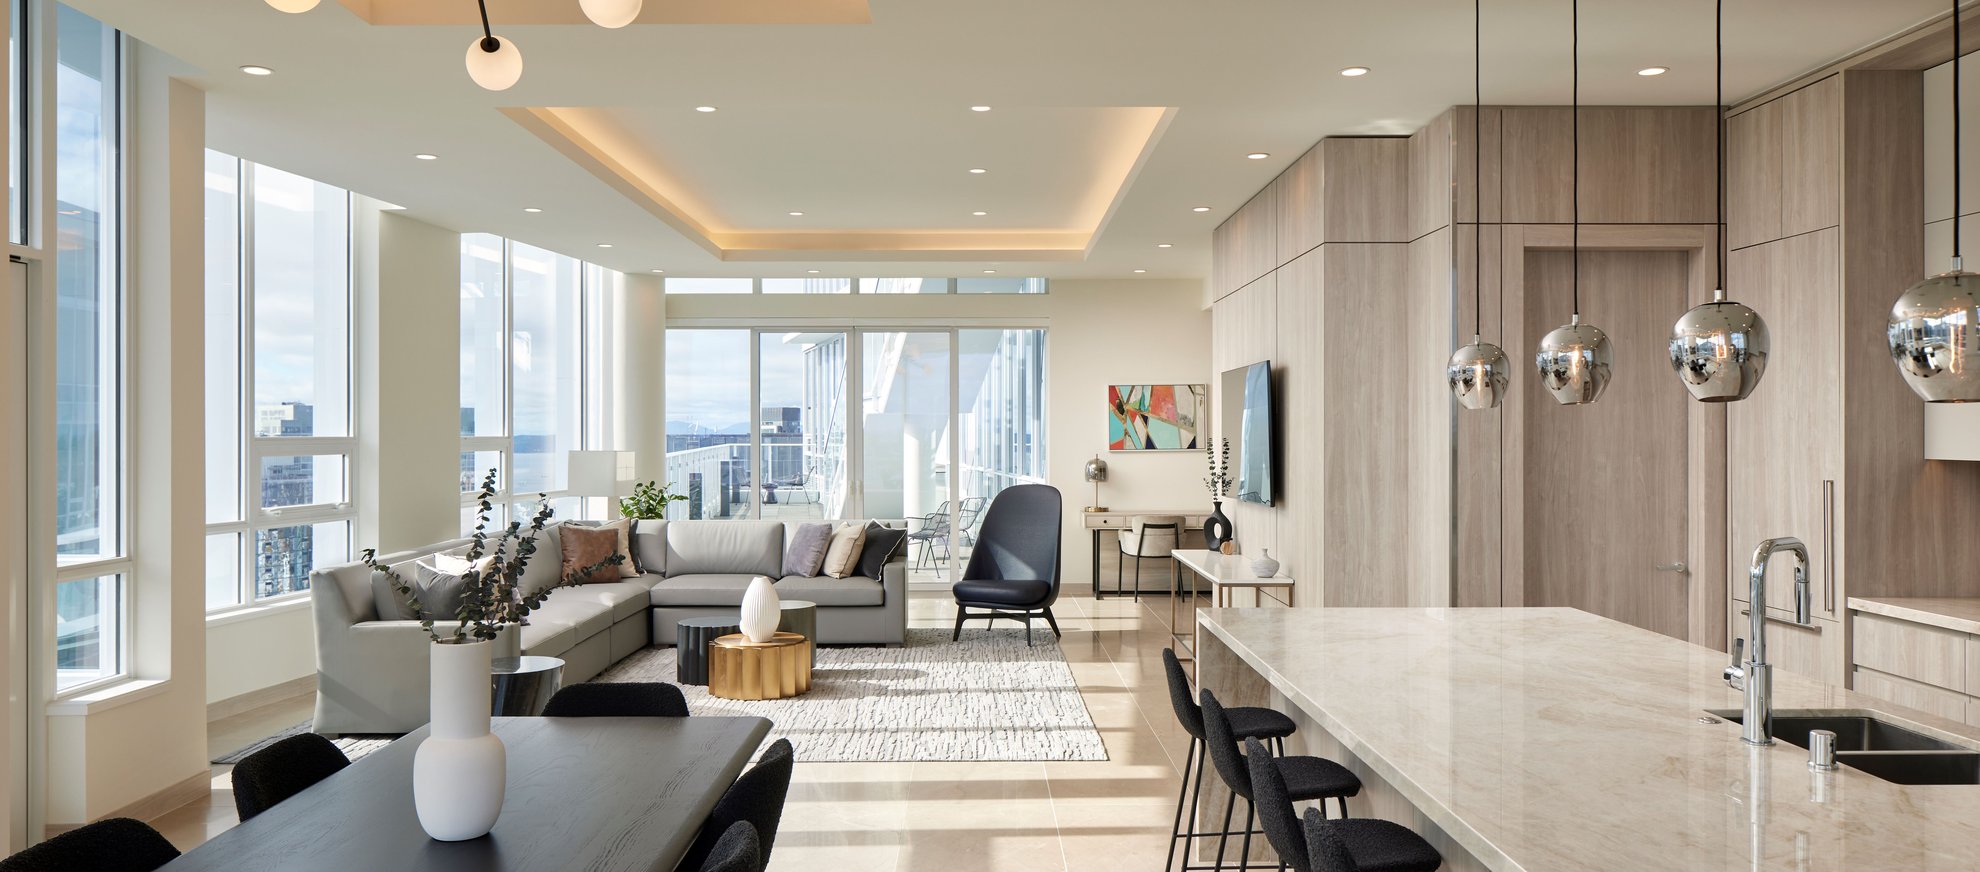 open concept kitchen and living area with a seattle city view at the penthouse level south lake union.jpg